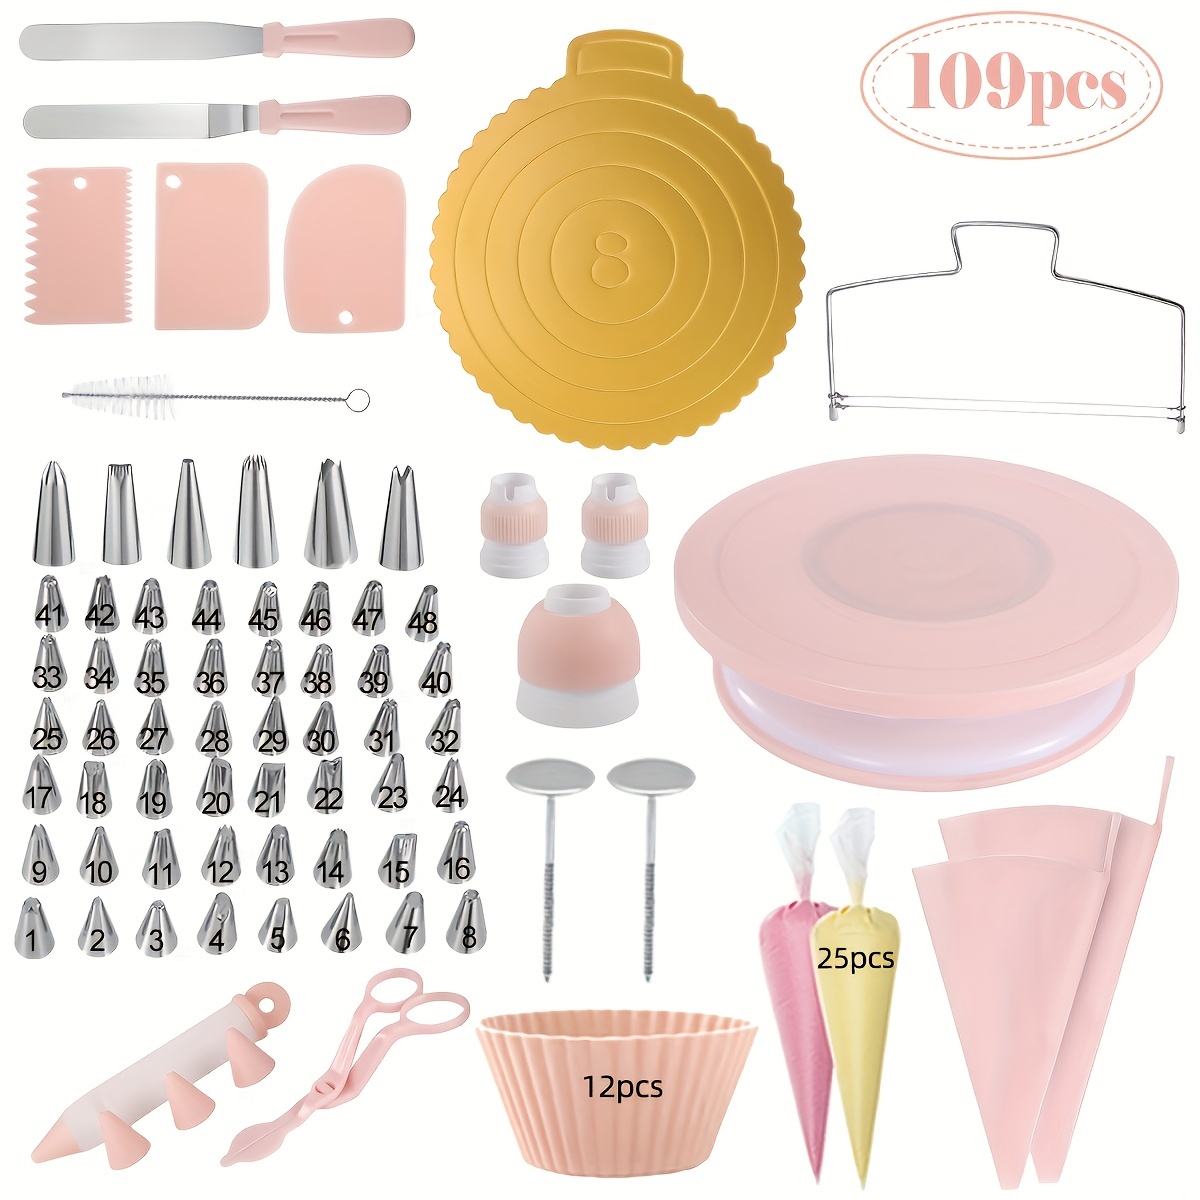 Cake Decorating Supplies | Cake Decorating Kit Baking Supplies Set For  Beginners | Rotating Cake Turntable Stand | Icing Piping Tips & Bags |  Frosting